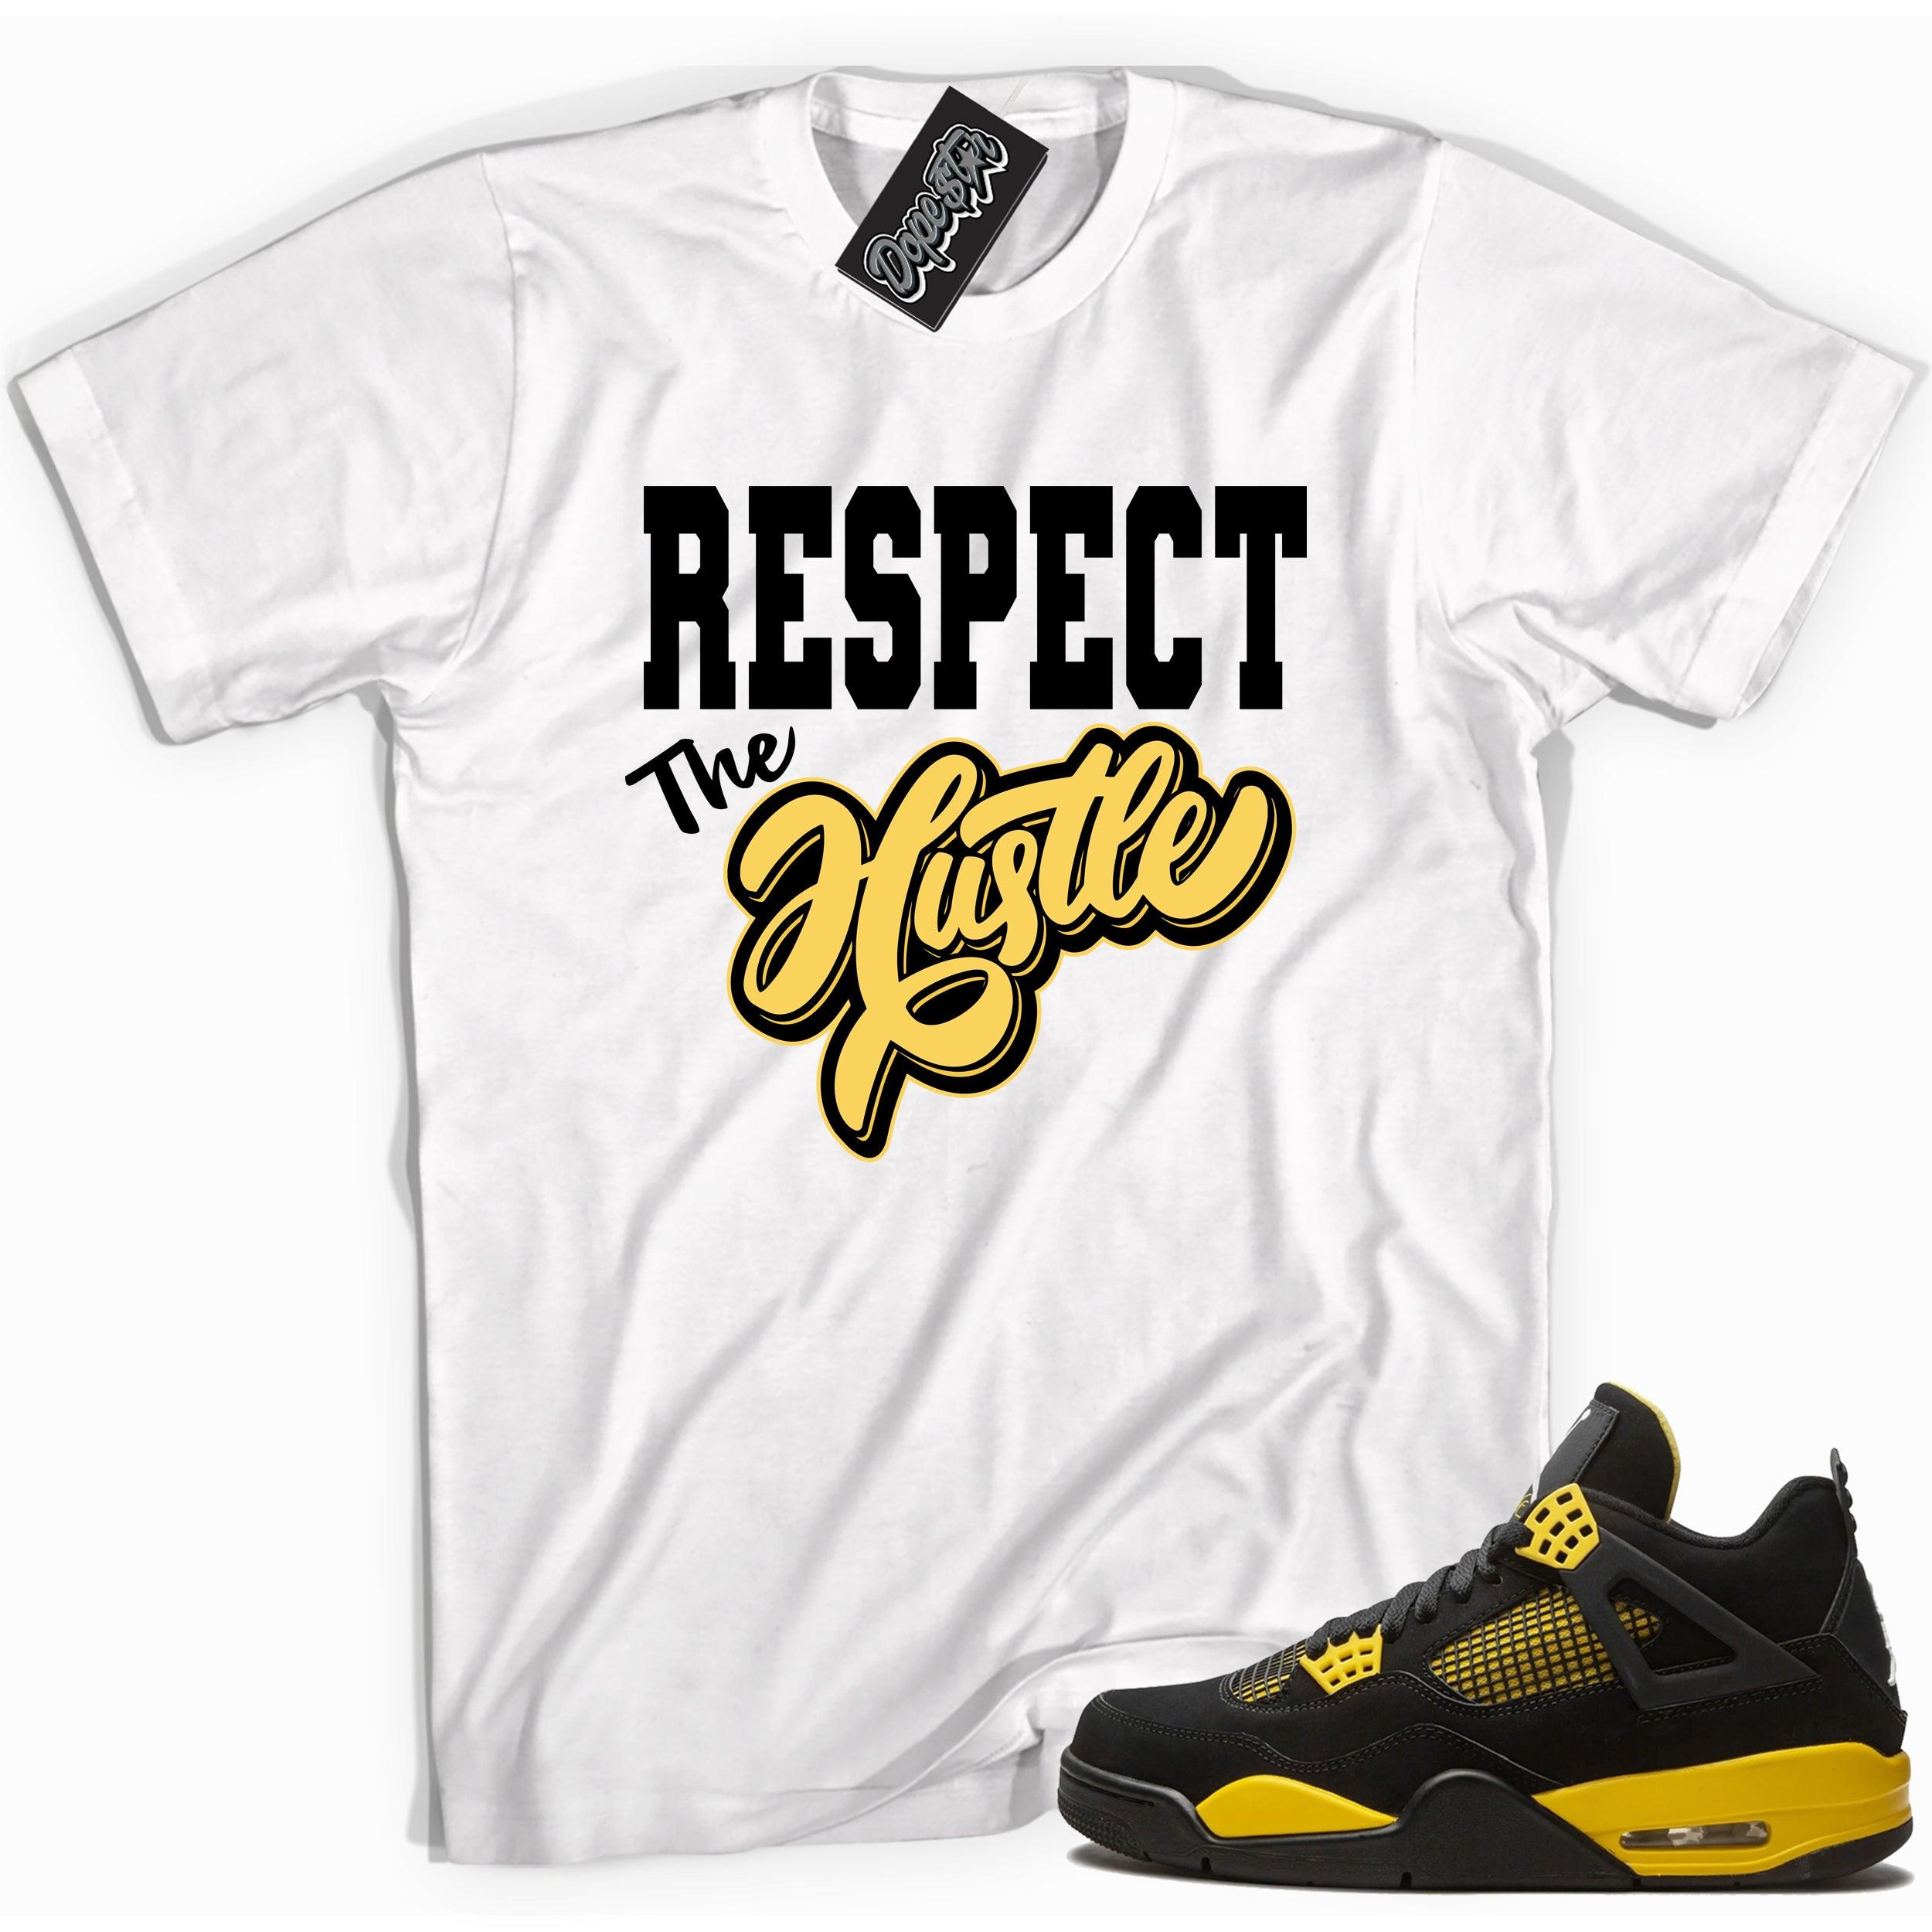 Cool white graphic tee with 'respect the hustle' print, that perfectly matches Air Jordan 4 Thunder sneakers